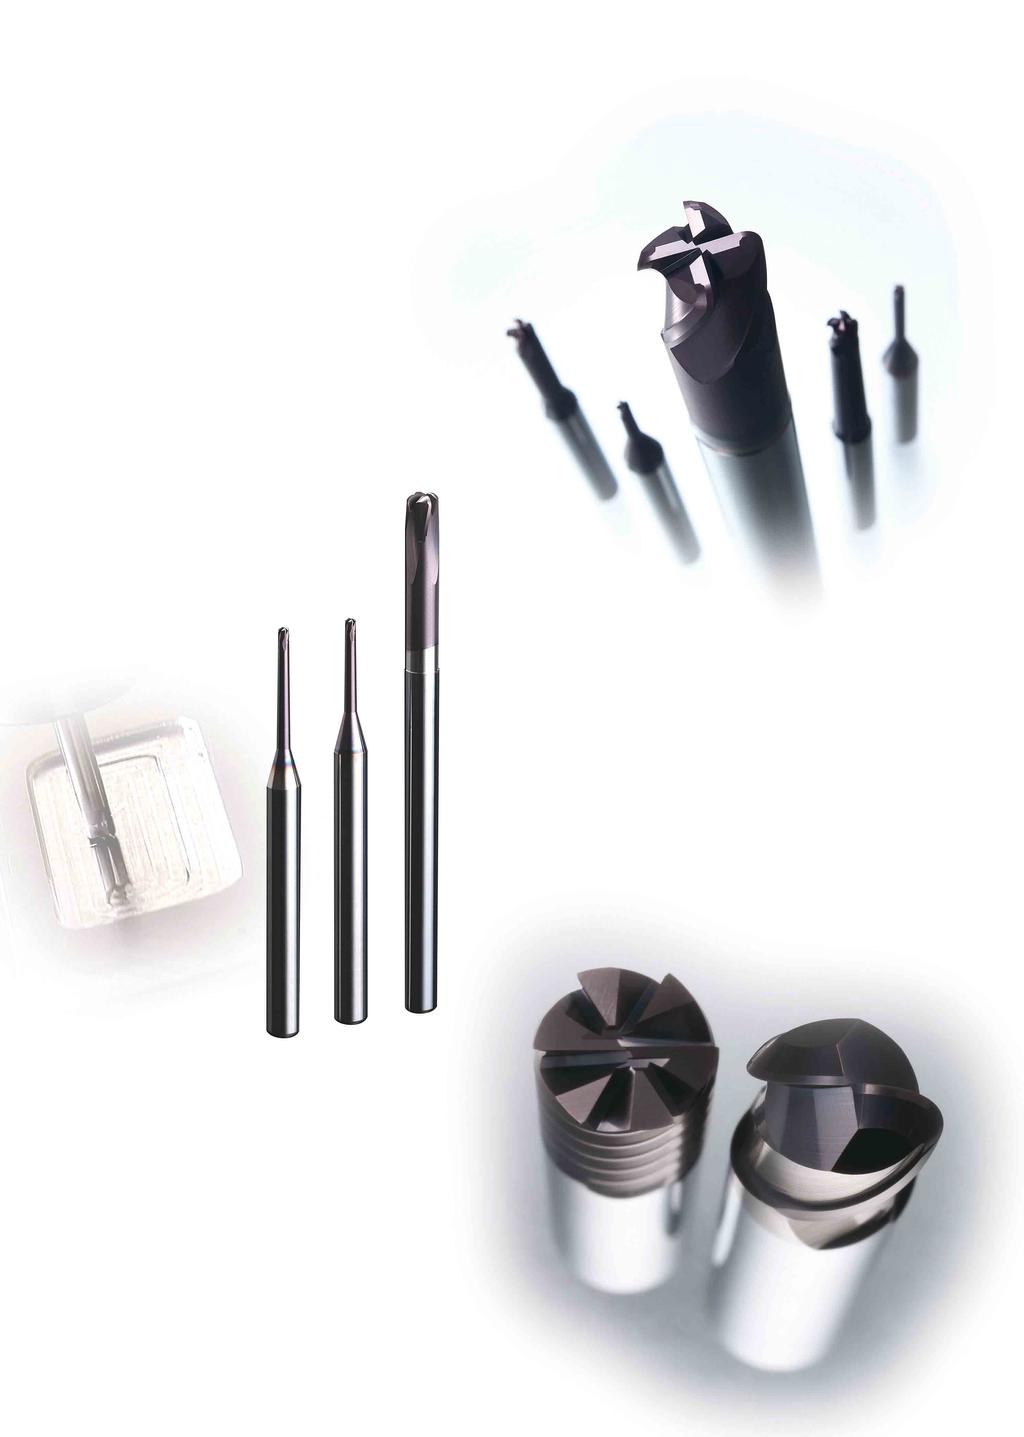 For high precision, rdius end milling VCPSB precision tooling for highly efficient milling of hrdened mterils.